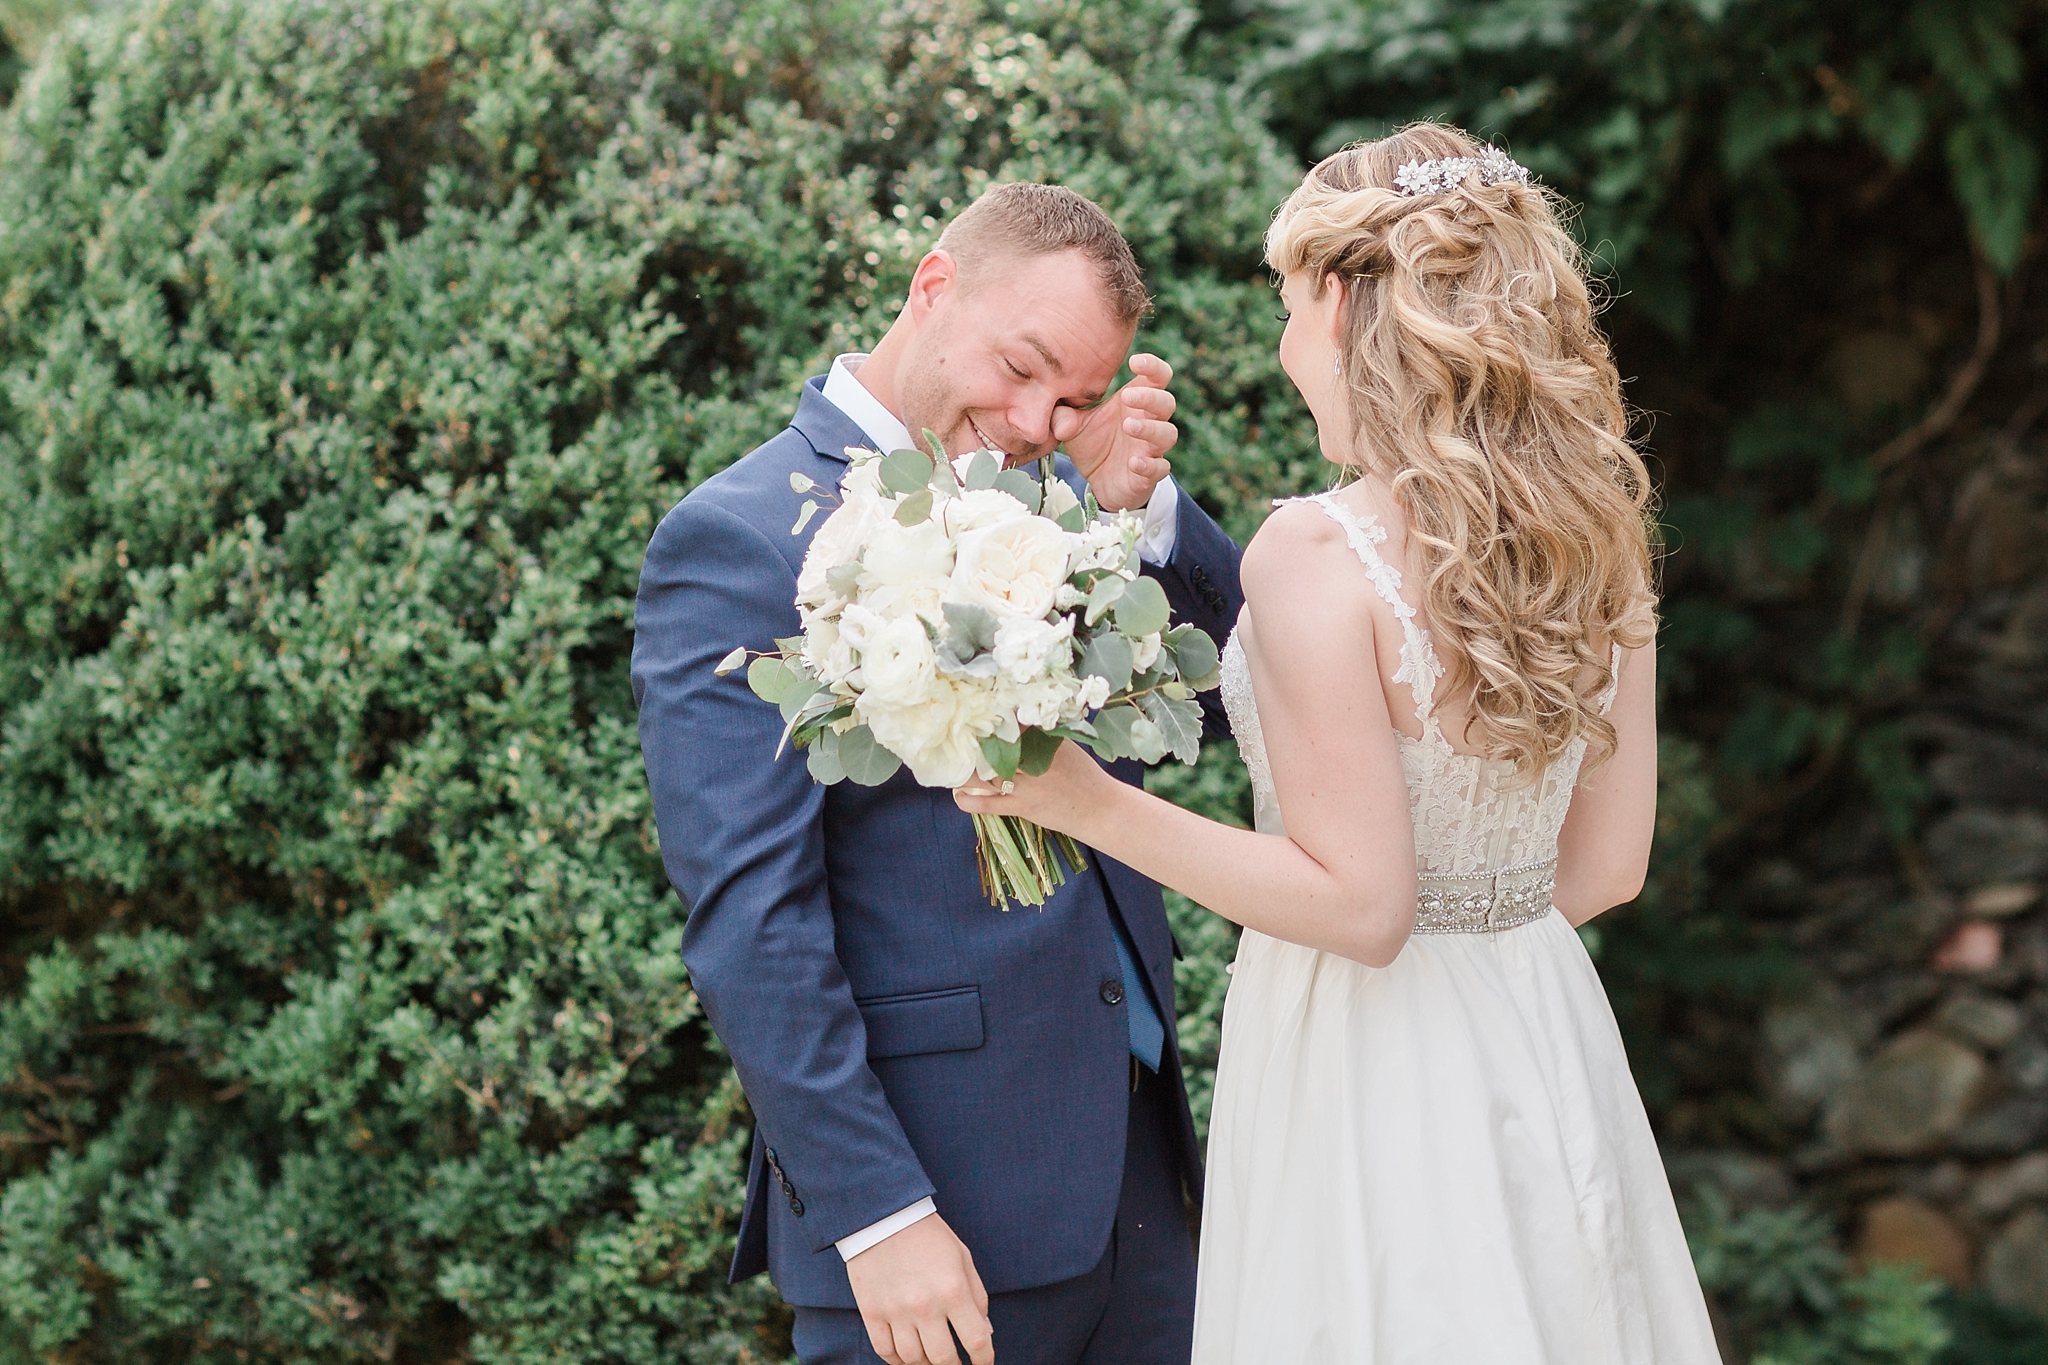 An elegant summer wedding at Airlie Center in Warrenton, VA as photographed by DC photographer, Alicia Lacey.